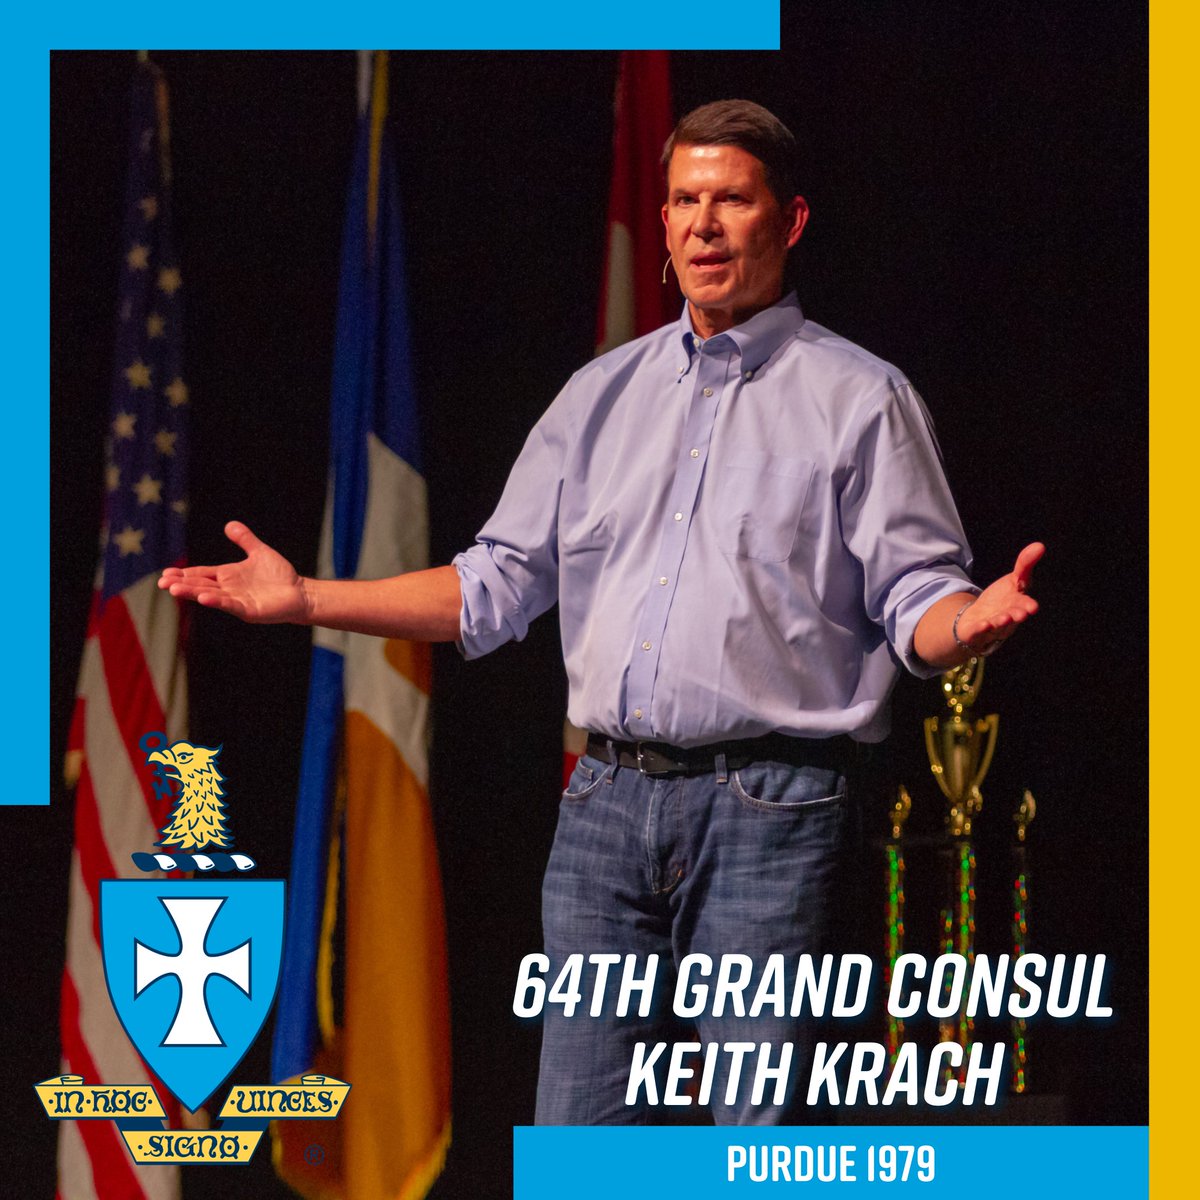 Happy birthday to 64th Grand Consul, Order of Constantine Sig and Significant Sig Keith Krach, PURDUE 1979! Thank you for your dedication to Sigma Chi and for your continued leadership!